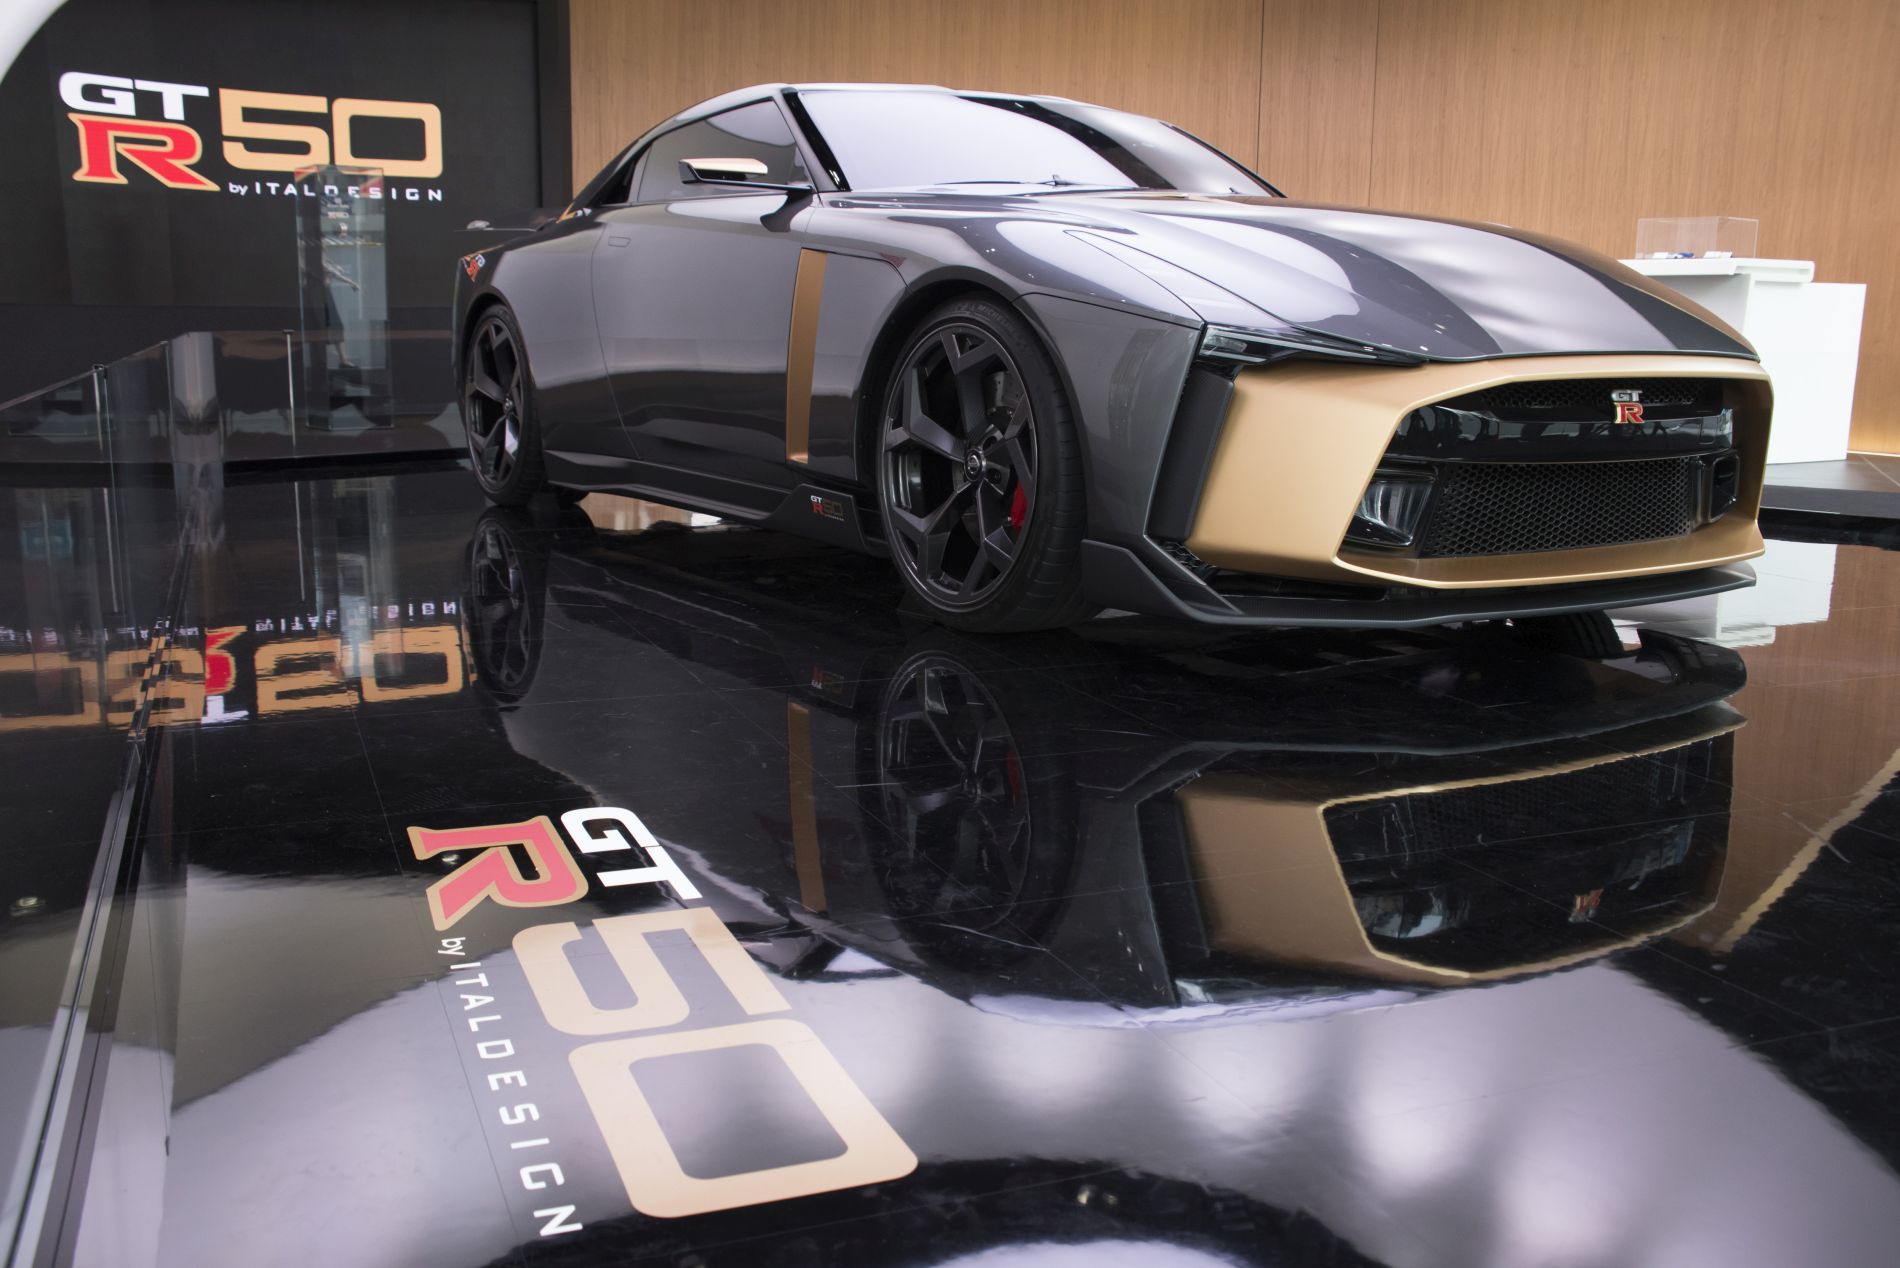 Nissan GT-R50 by Italdesign comes to Nissan Crossing